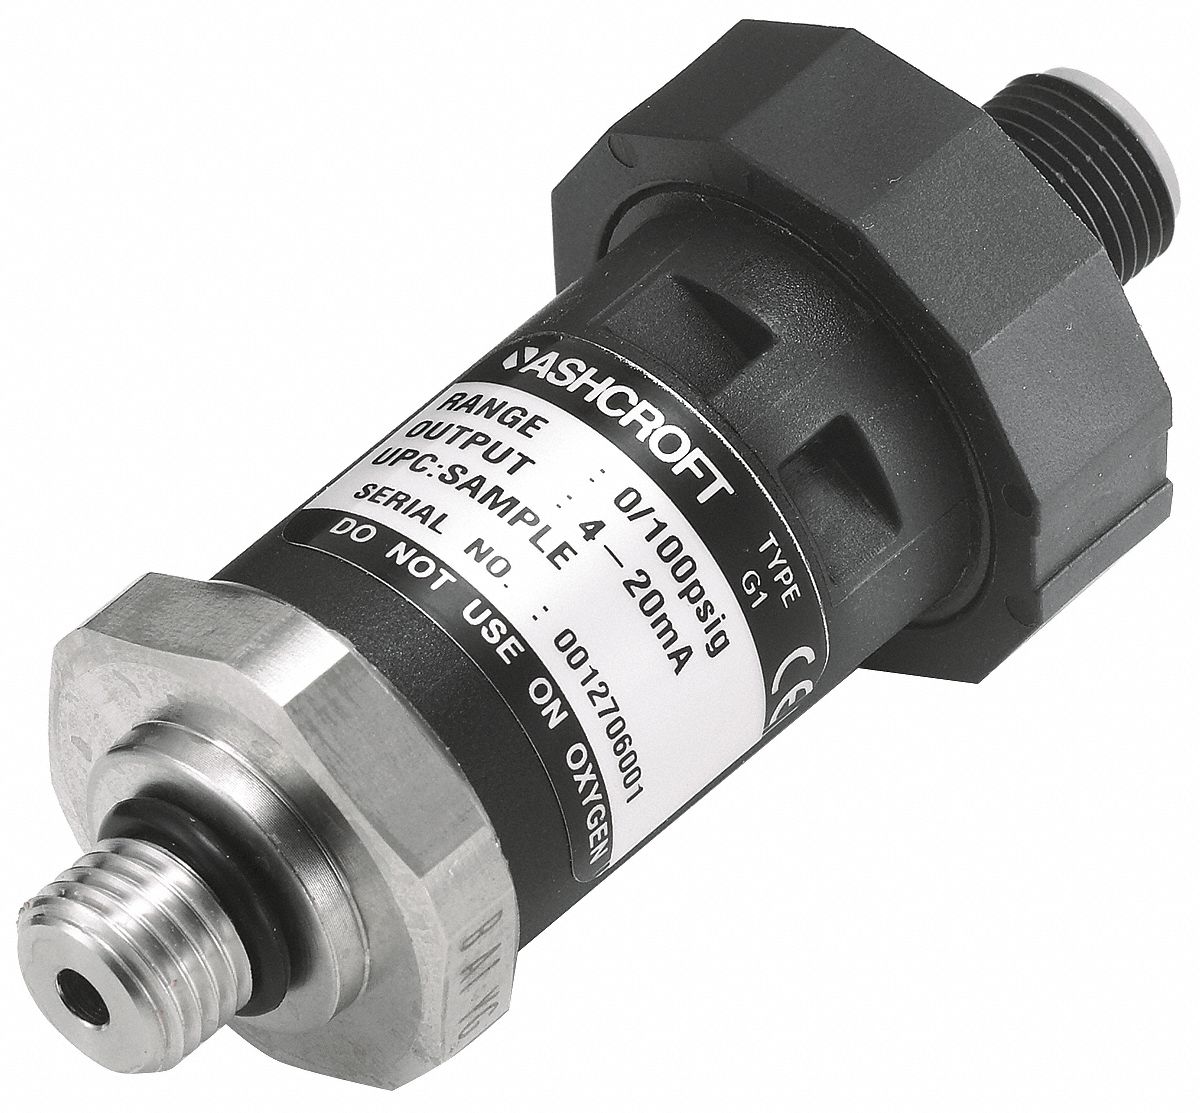 4 to 20mA DC Output 7/16-20 SAE Male Pressure Transmitter 0 to 3000 psi Ashcroft G17MEK42F23000# 